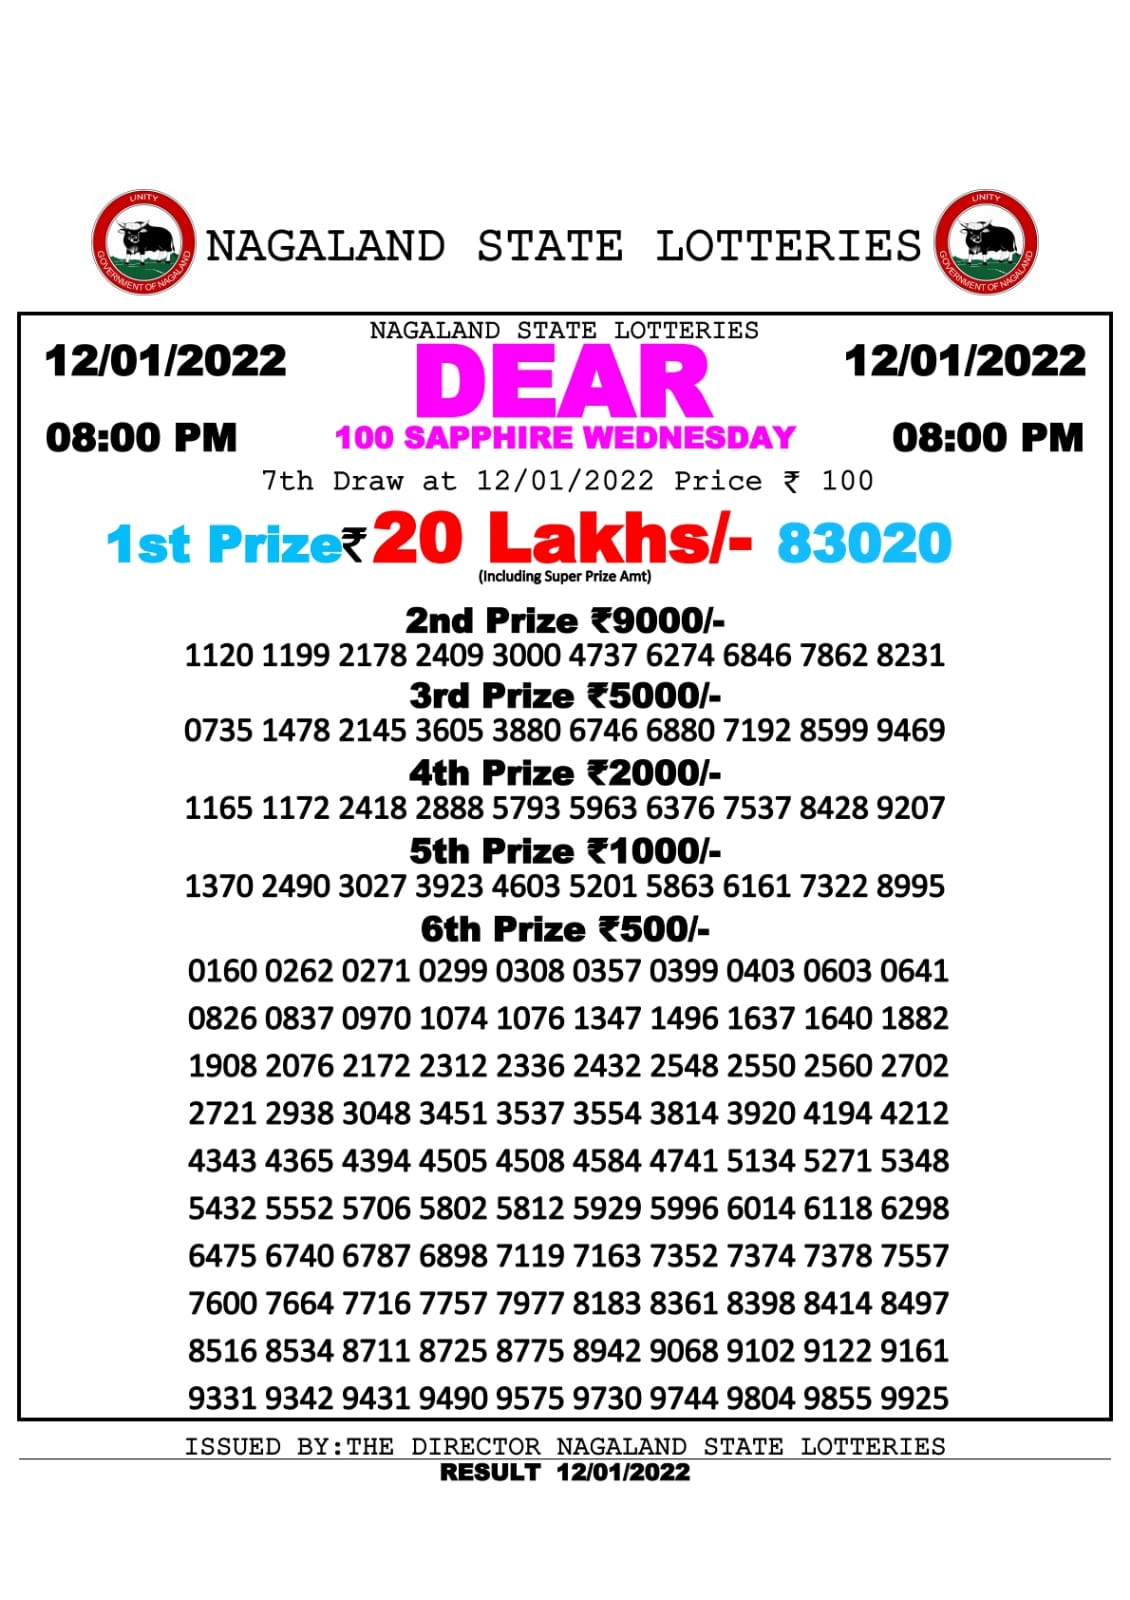 NAGALLAND STATE DEAR 100 WEEKLY LOTTERY 8 pm 12-01-2022